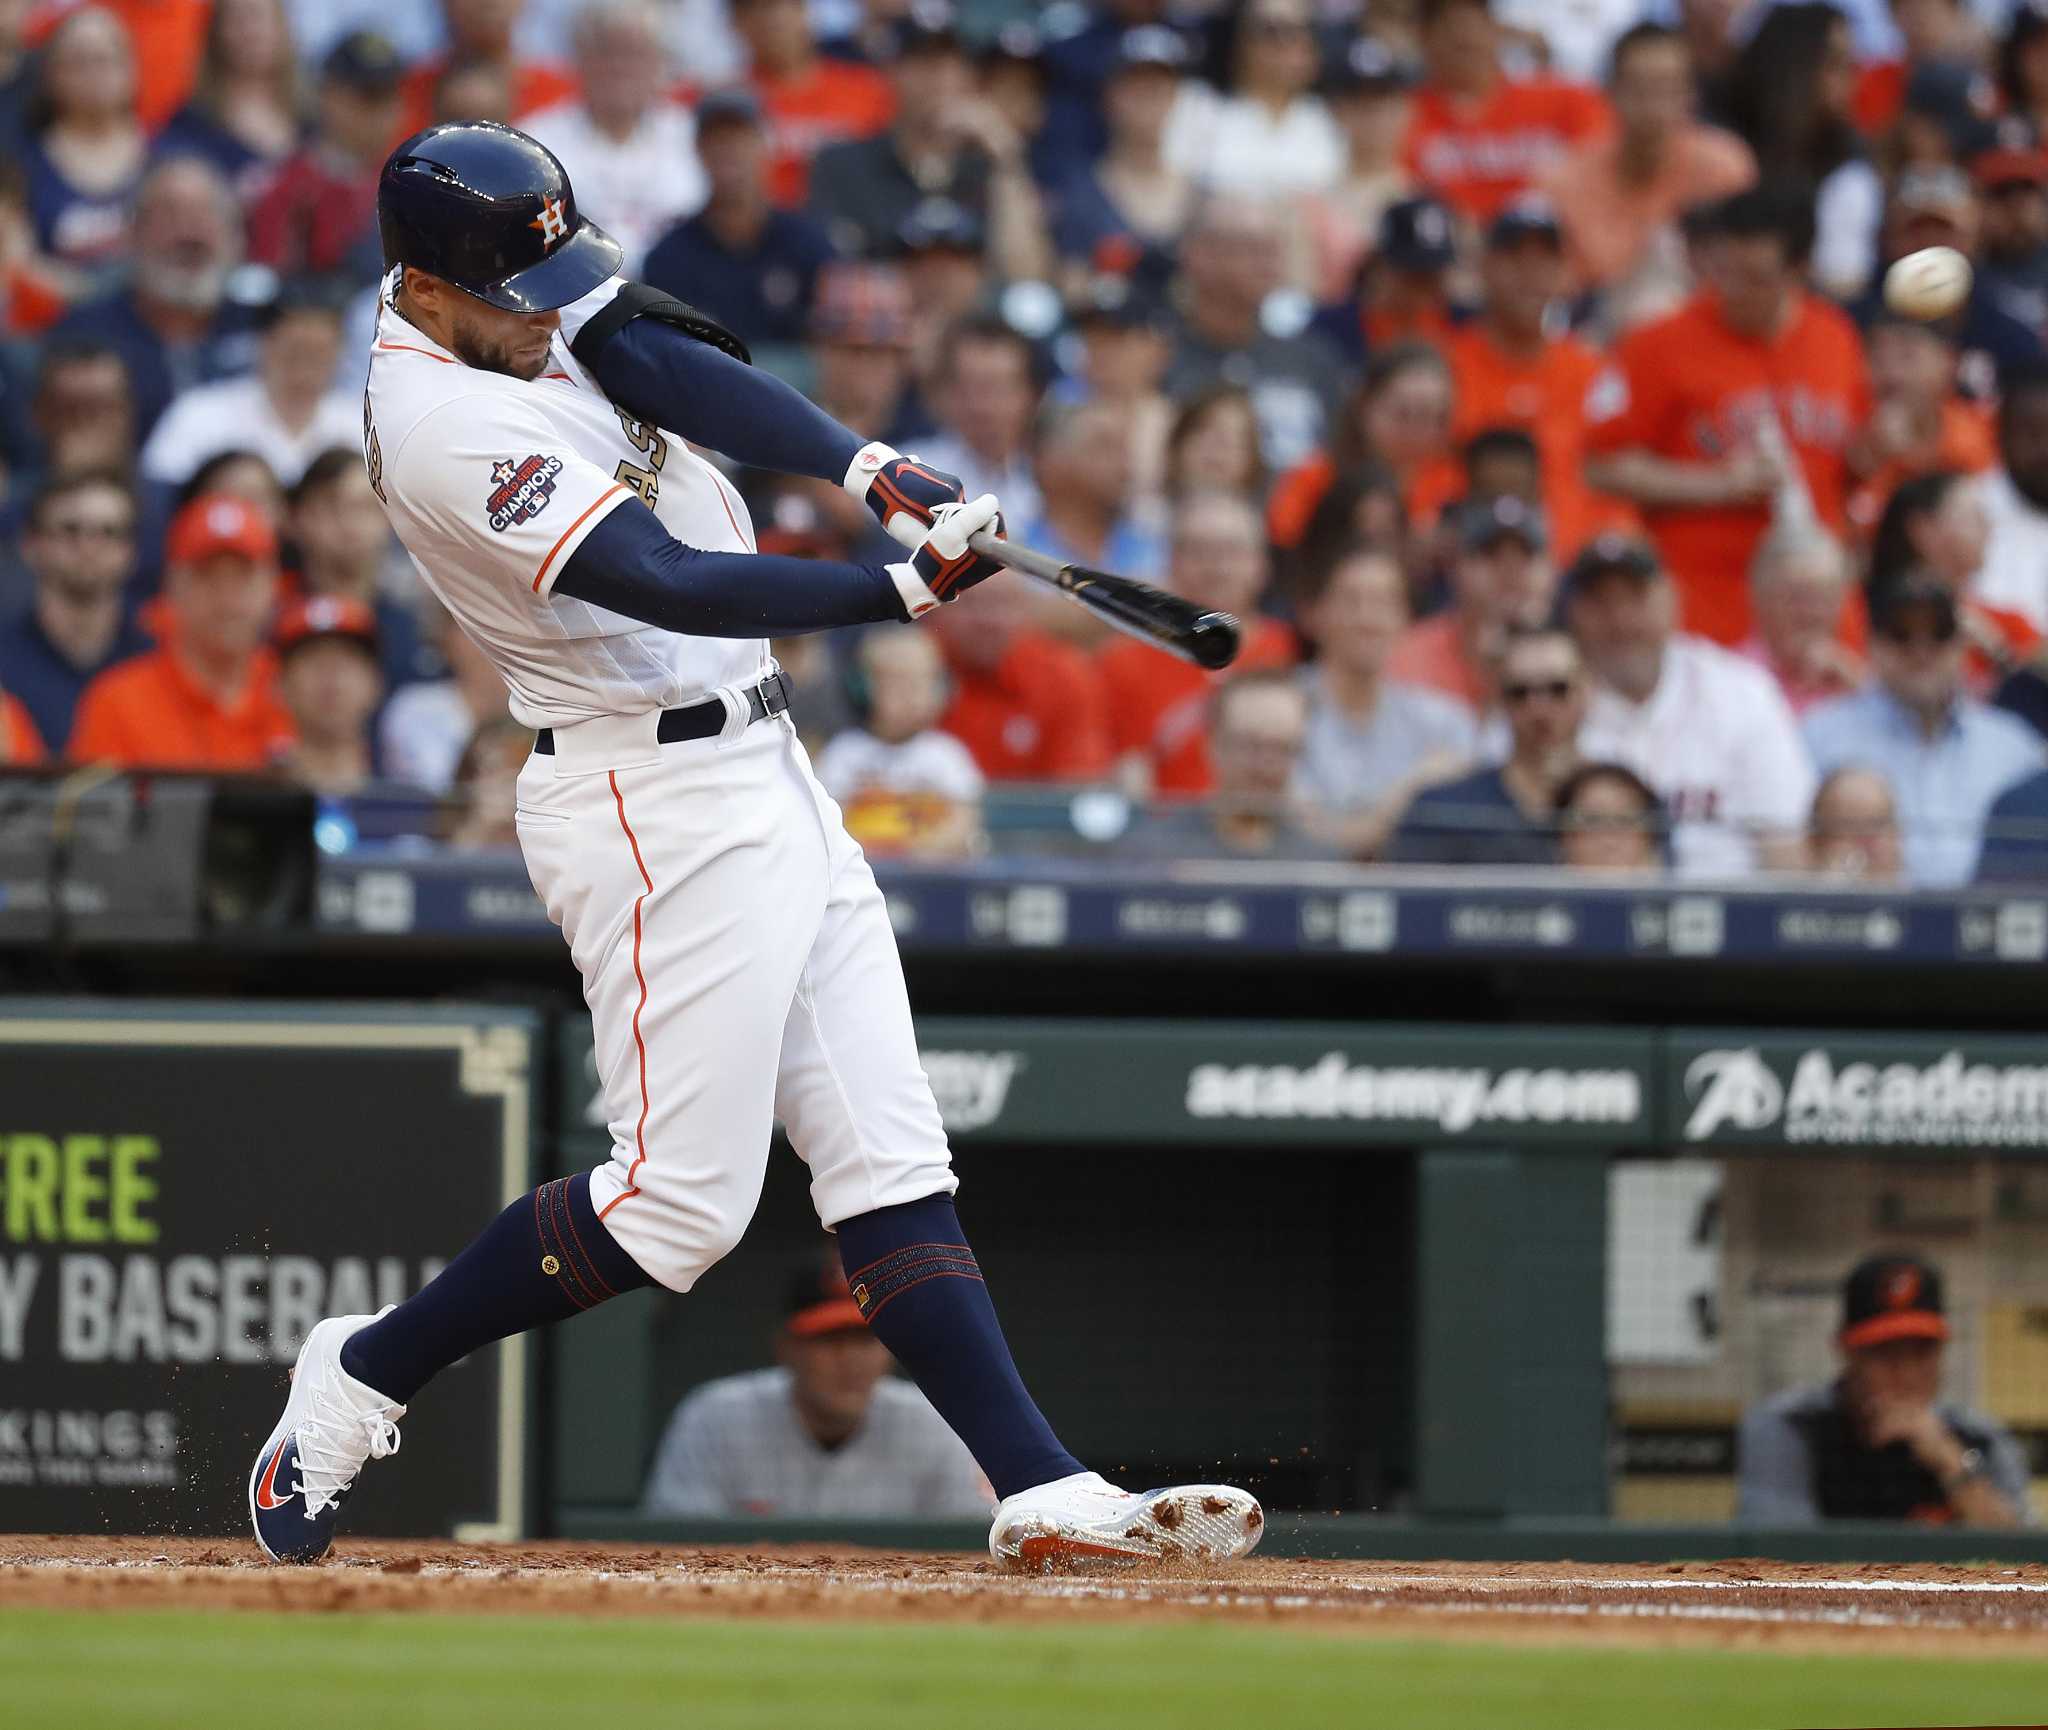 See which Astros players heard trash can bangs the most during